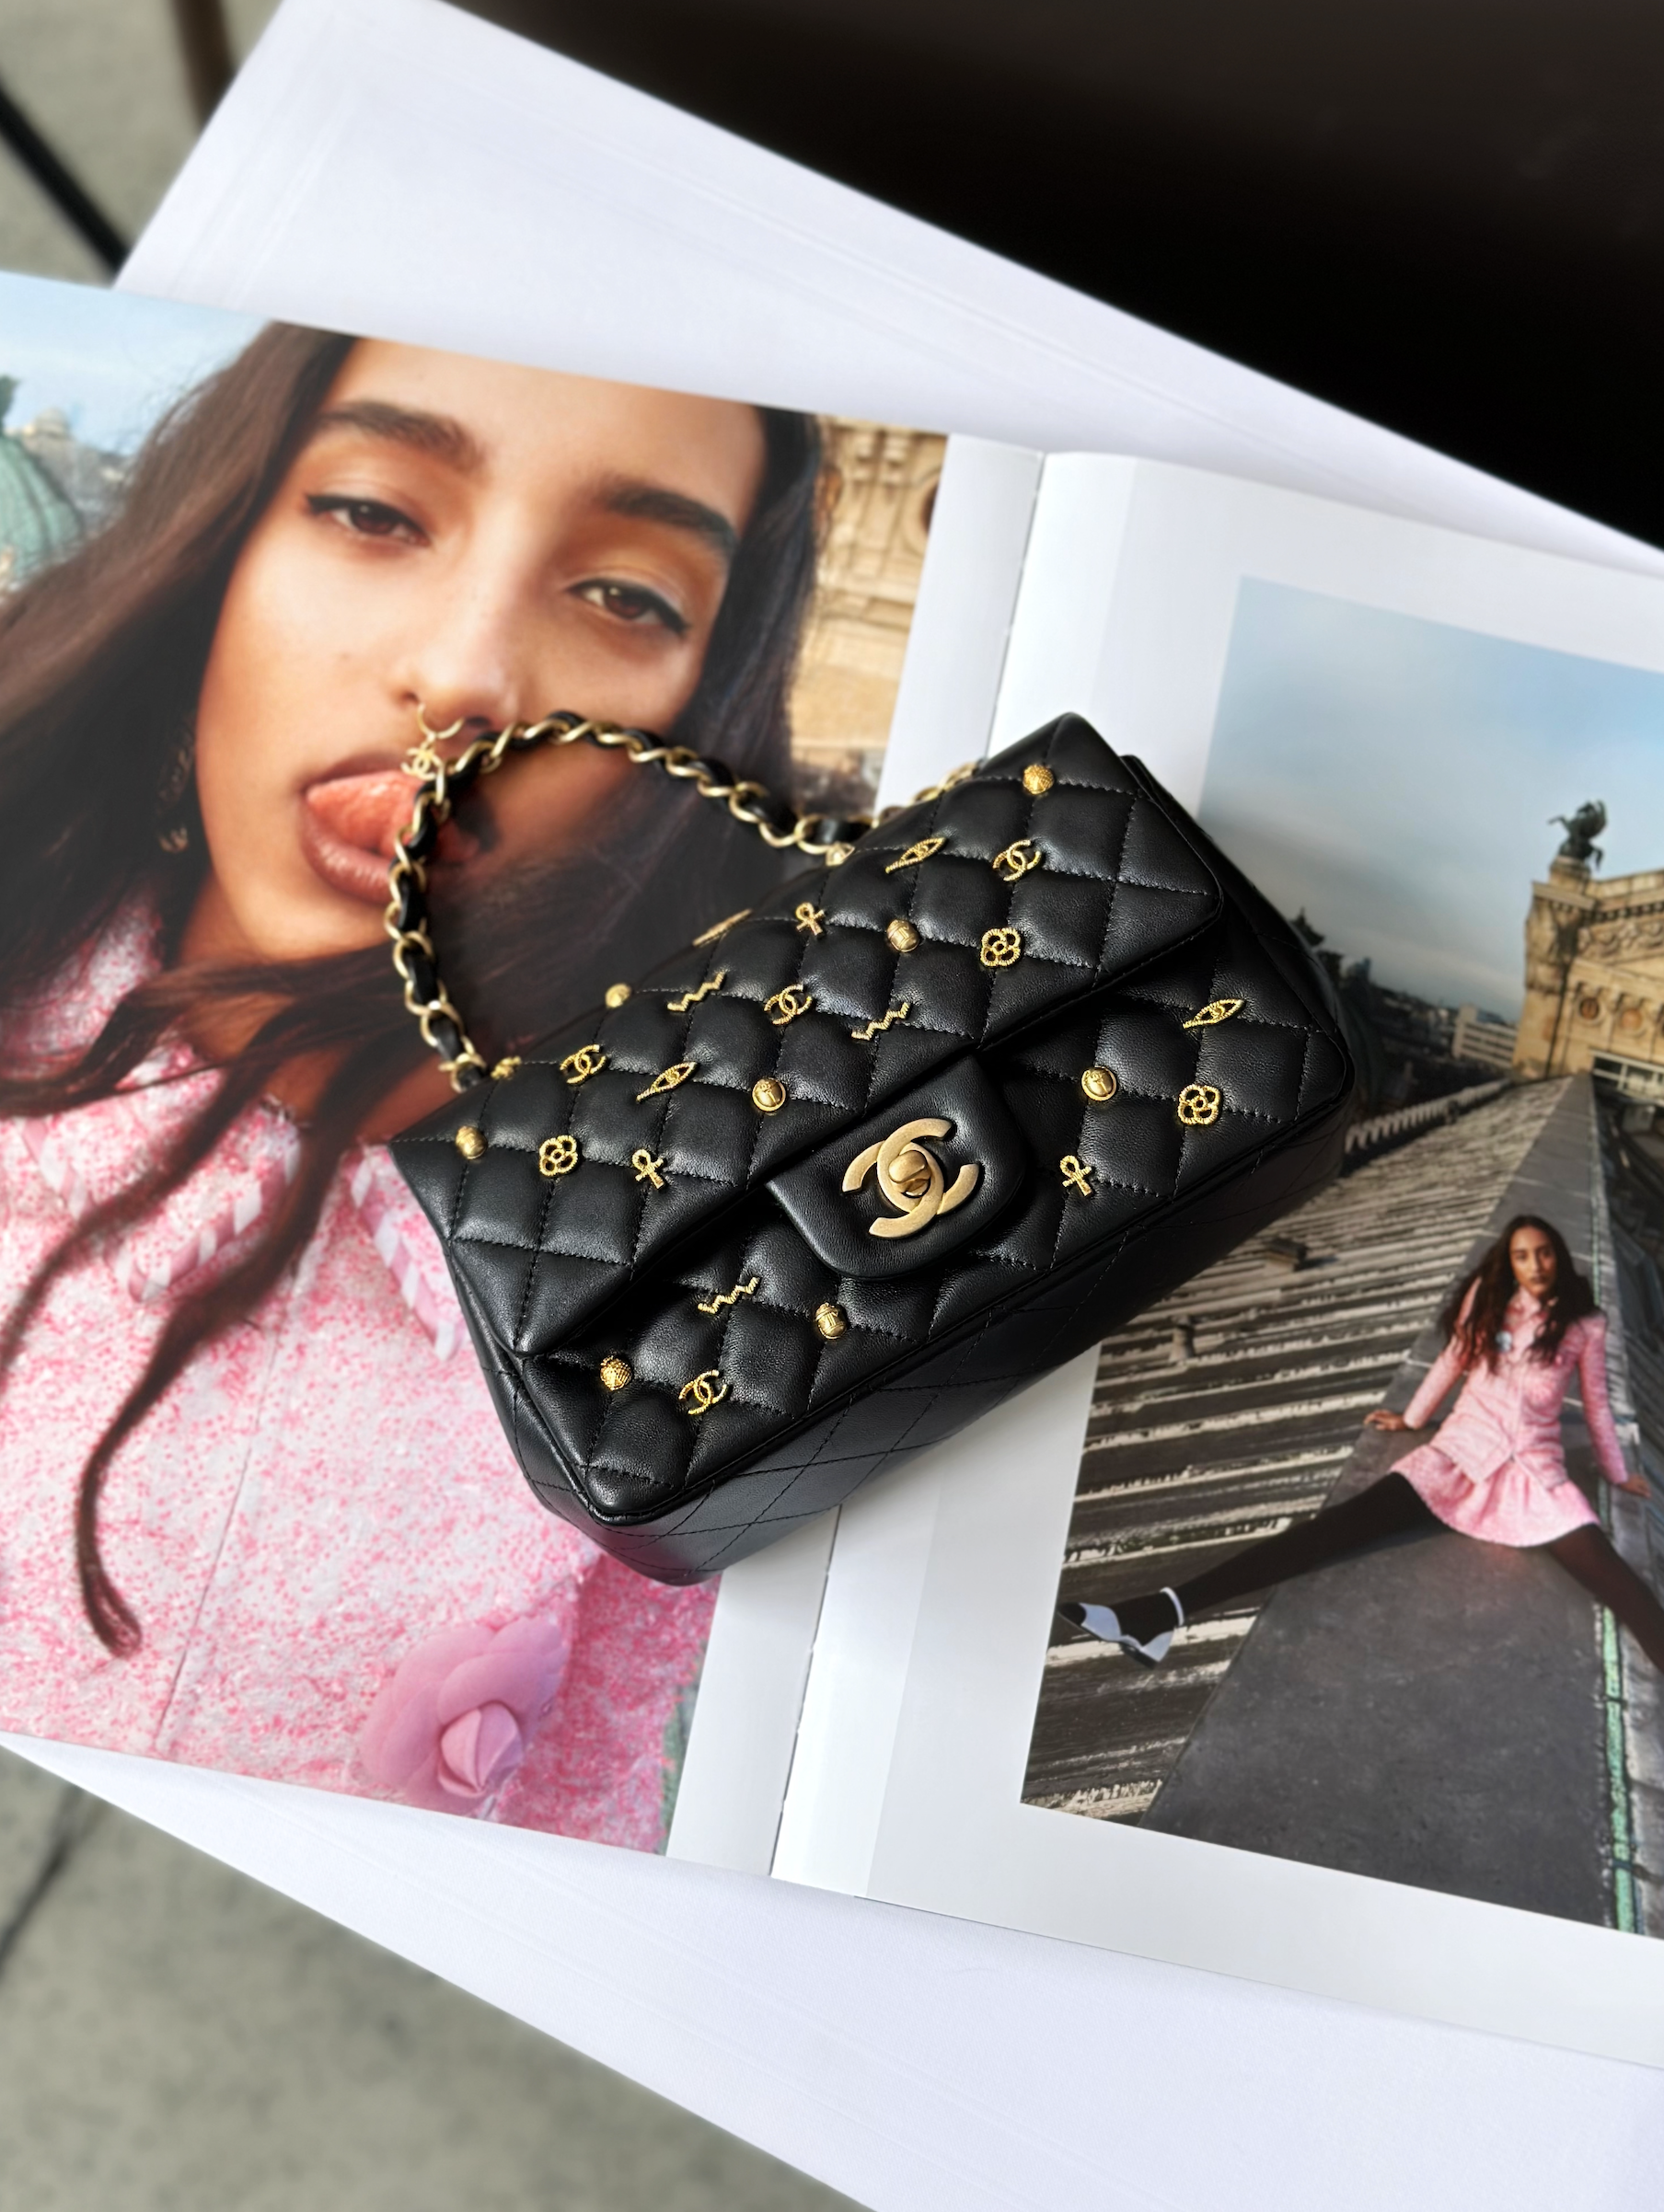 THE ULTIMATE GUIDE TO BUYING CHANEL ONLINE: HOW TO FIND AUTHENTIC PRODUCTS AND SCORE THE BEST DEALS